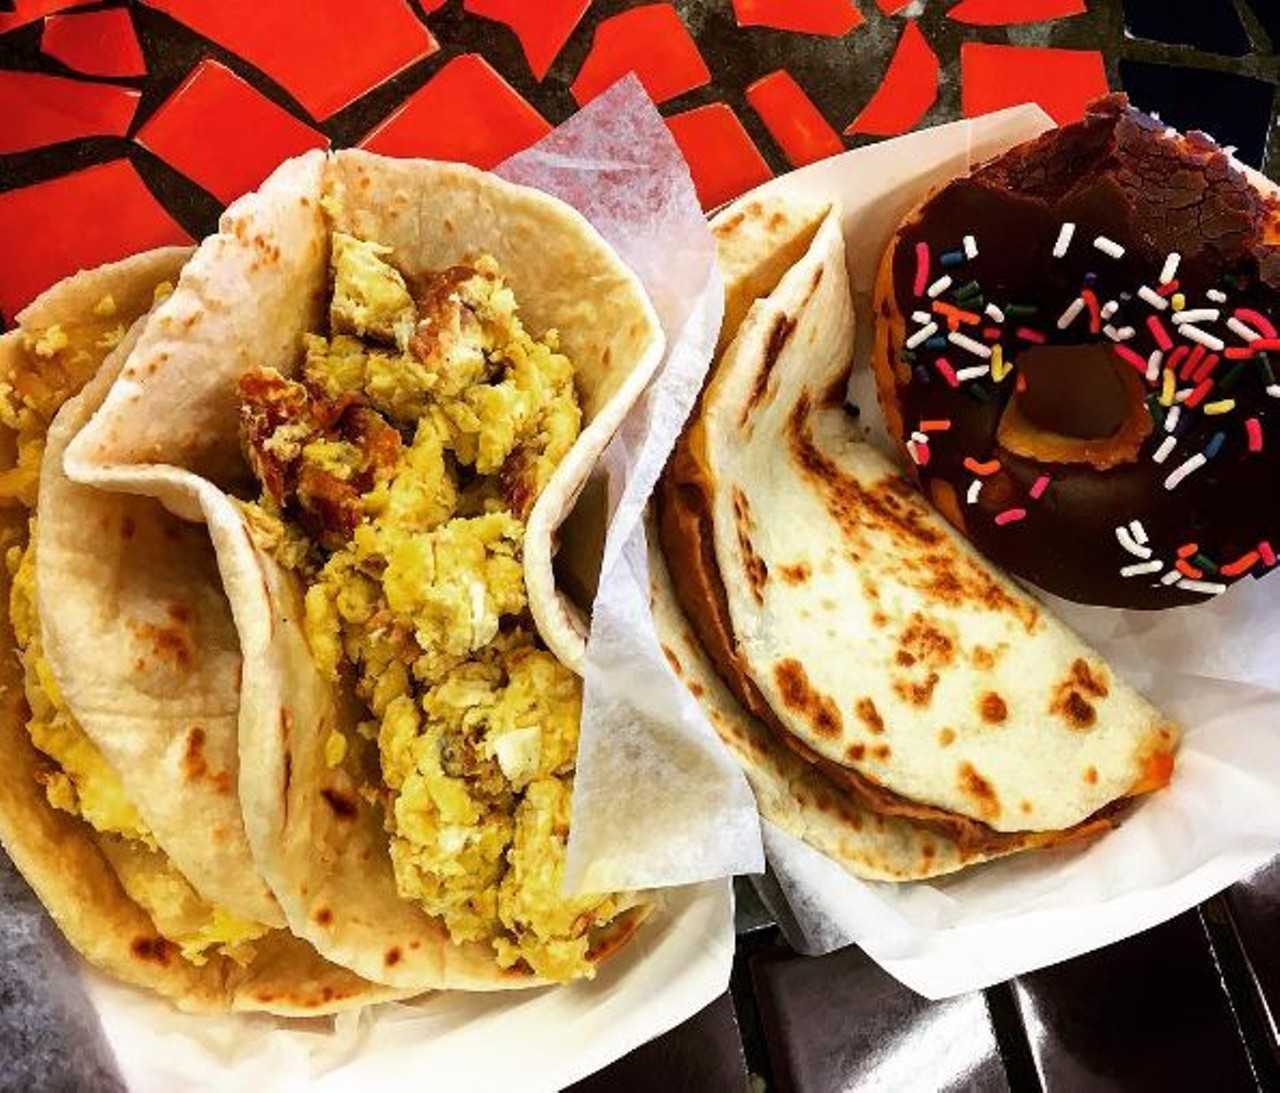 The Original Donut Shop
3307 Fredericksburg Rd, (210) 734-5661
If their sinfully delicious breakfast tacos and donuts don&#146;t sober you up, we don&#146;t know what will.
Photo via Instagram, depechesnow